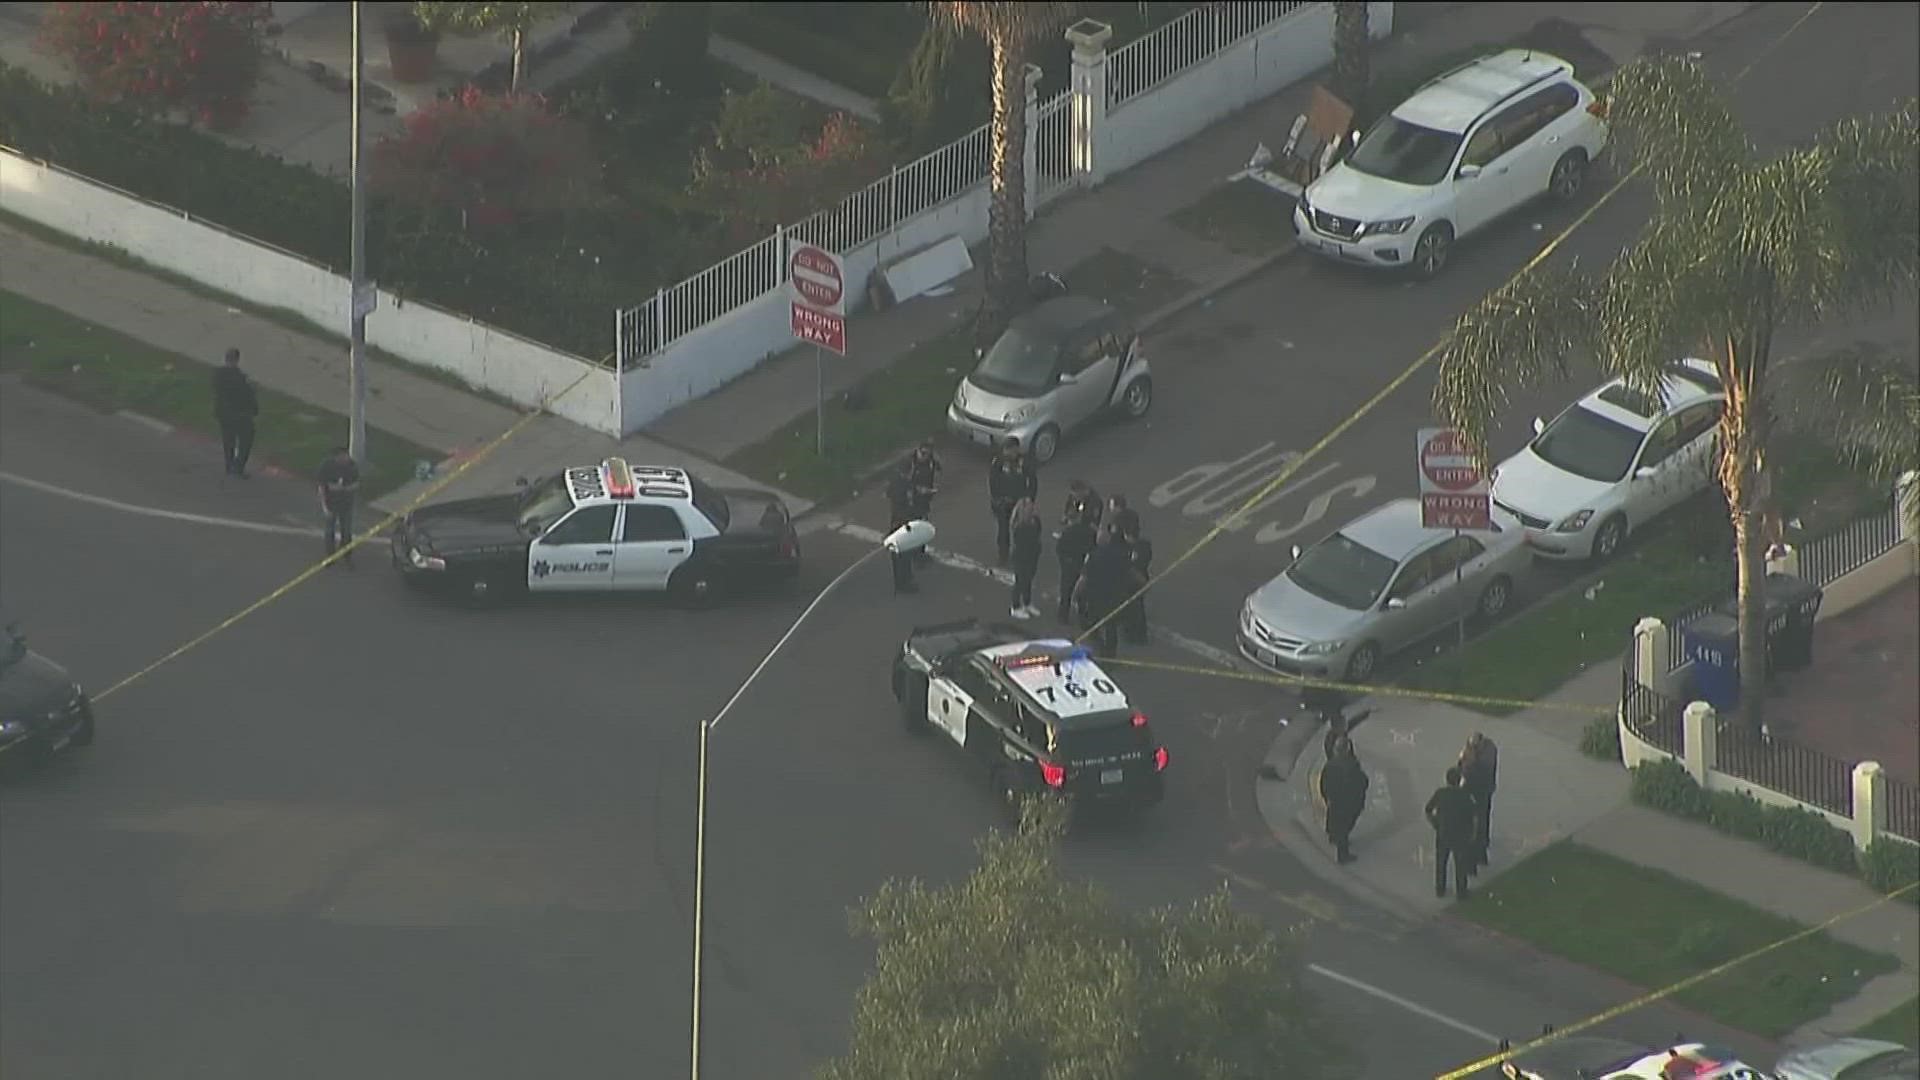 Person wounded in shooting in Teralta West neighborhood.